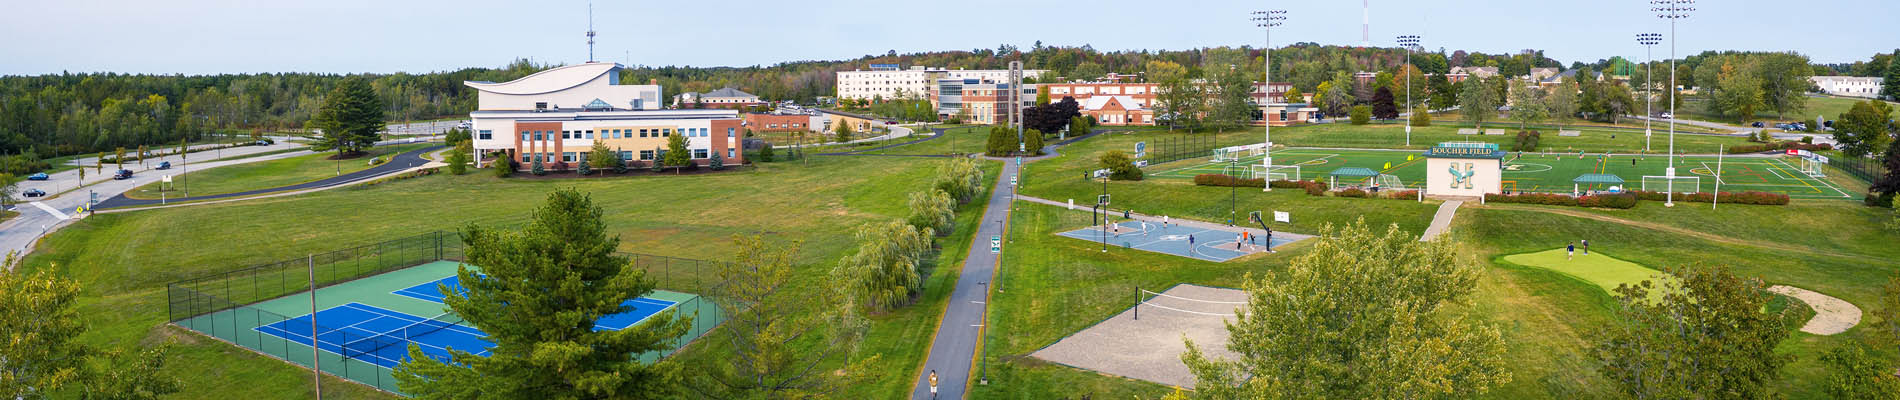 An aerial view of the Husson campus